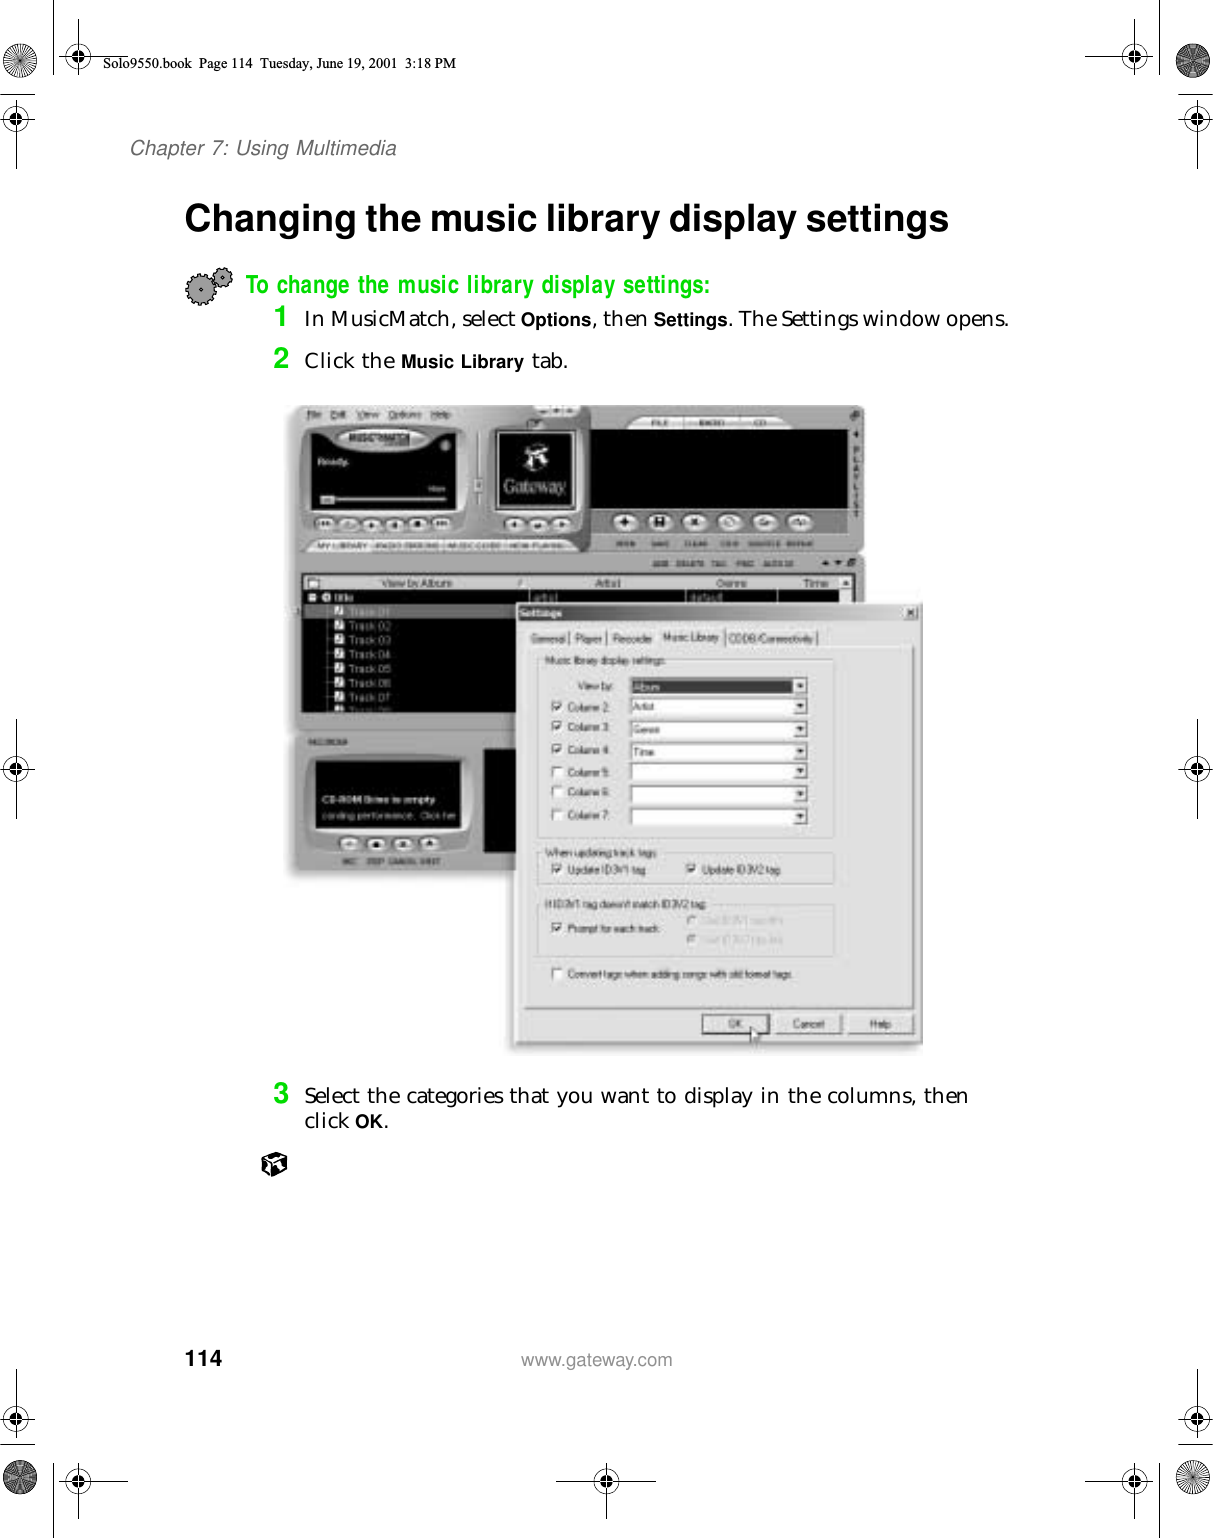 114Chapter 7: Using Multimediawww.gateway.comChanging the music library display settingsTo change the music library display settings:1In MusicMatch, select Options, then Settings. The Settings window opens.2Click the Music Library tab.3Select the categories that you want to display in the columns, then click OK.Solo9550.book Page 114 Tuesday, June 19, 2001 3:18 PM